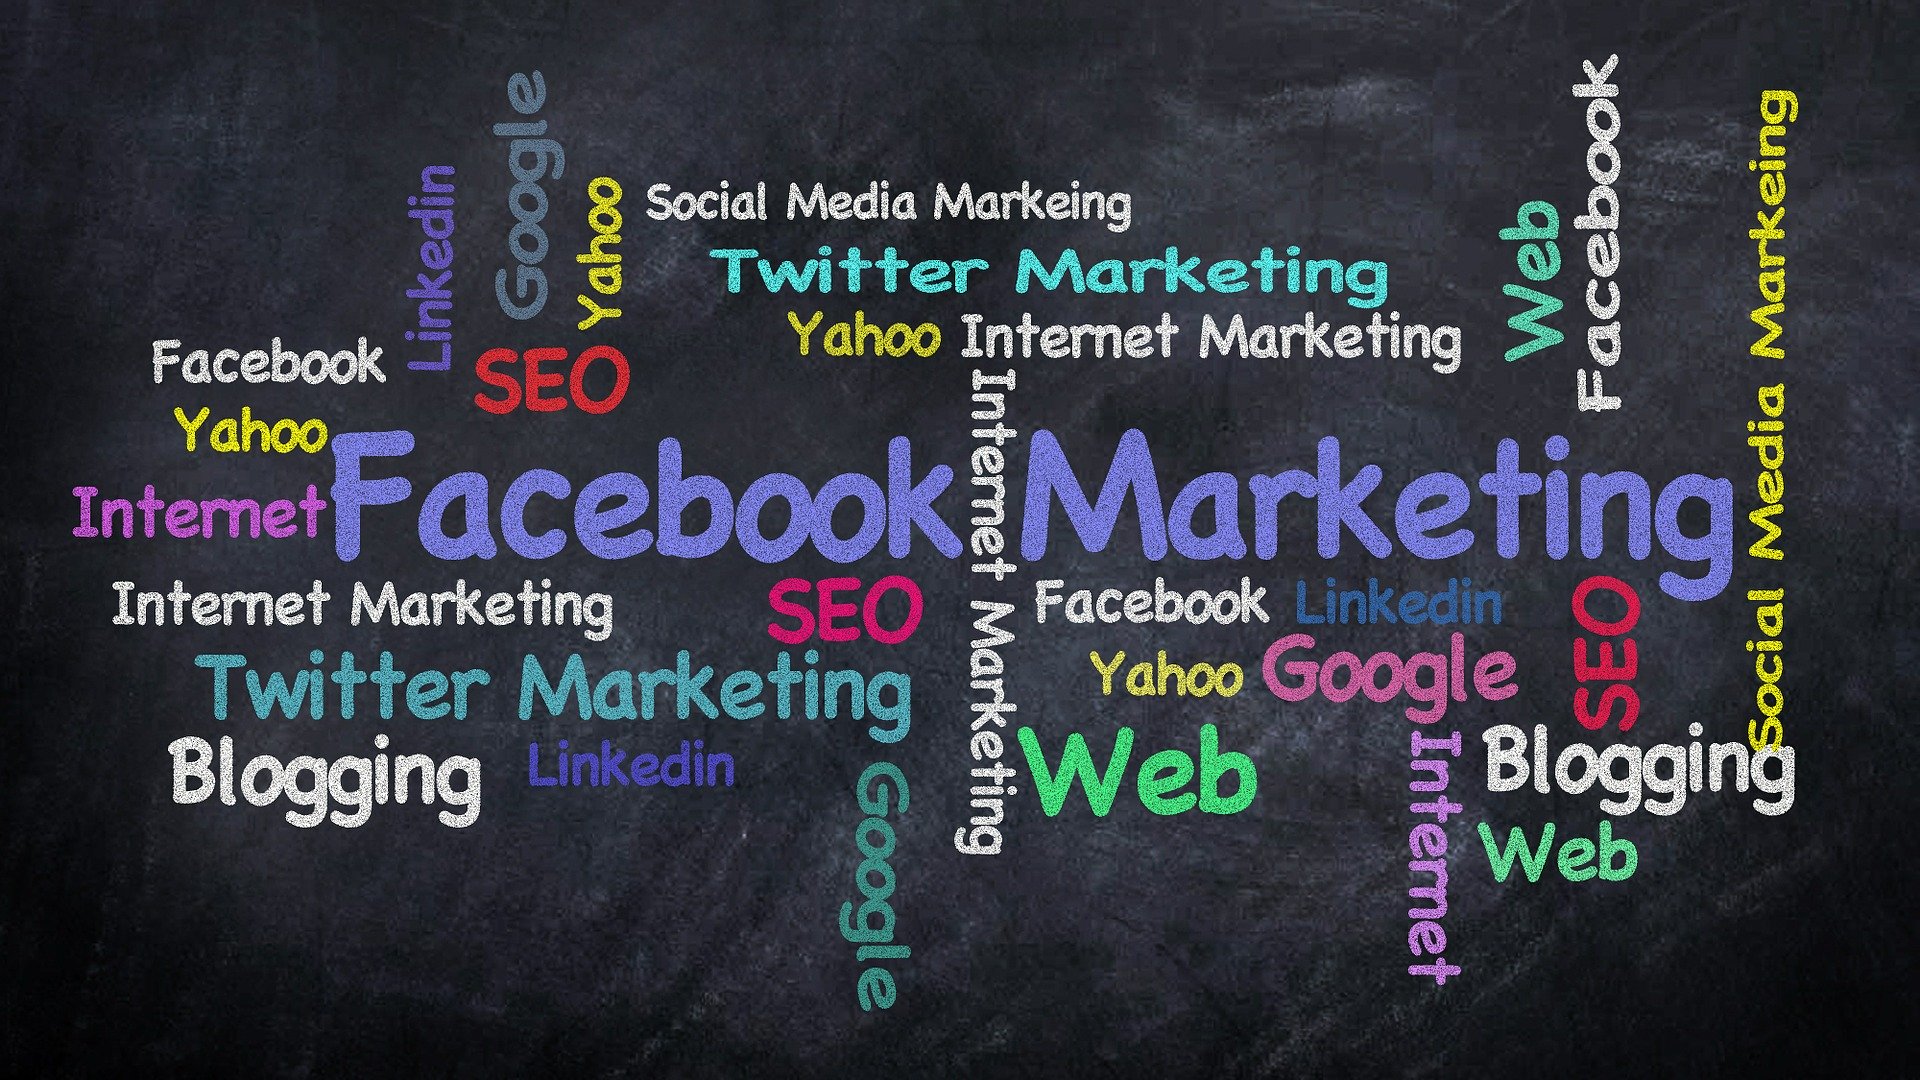 Facebook Marketing : Tips To Grow Your Marketing In Facebook.